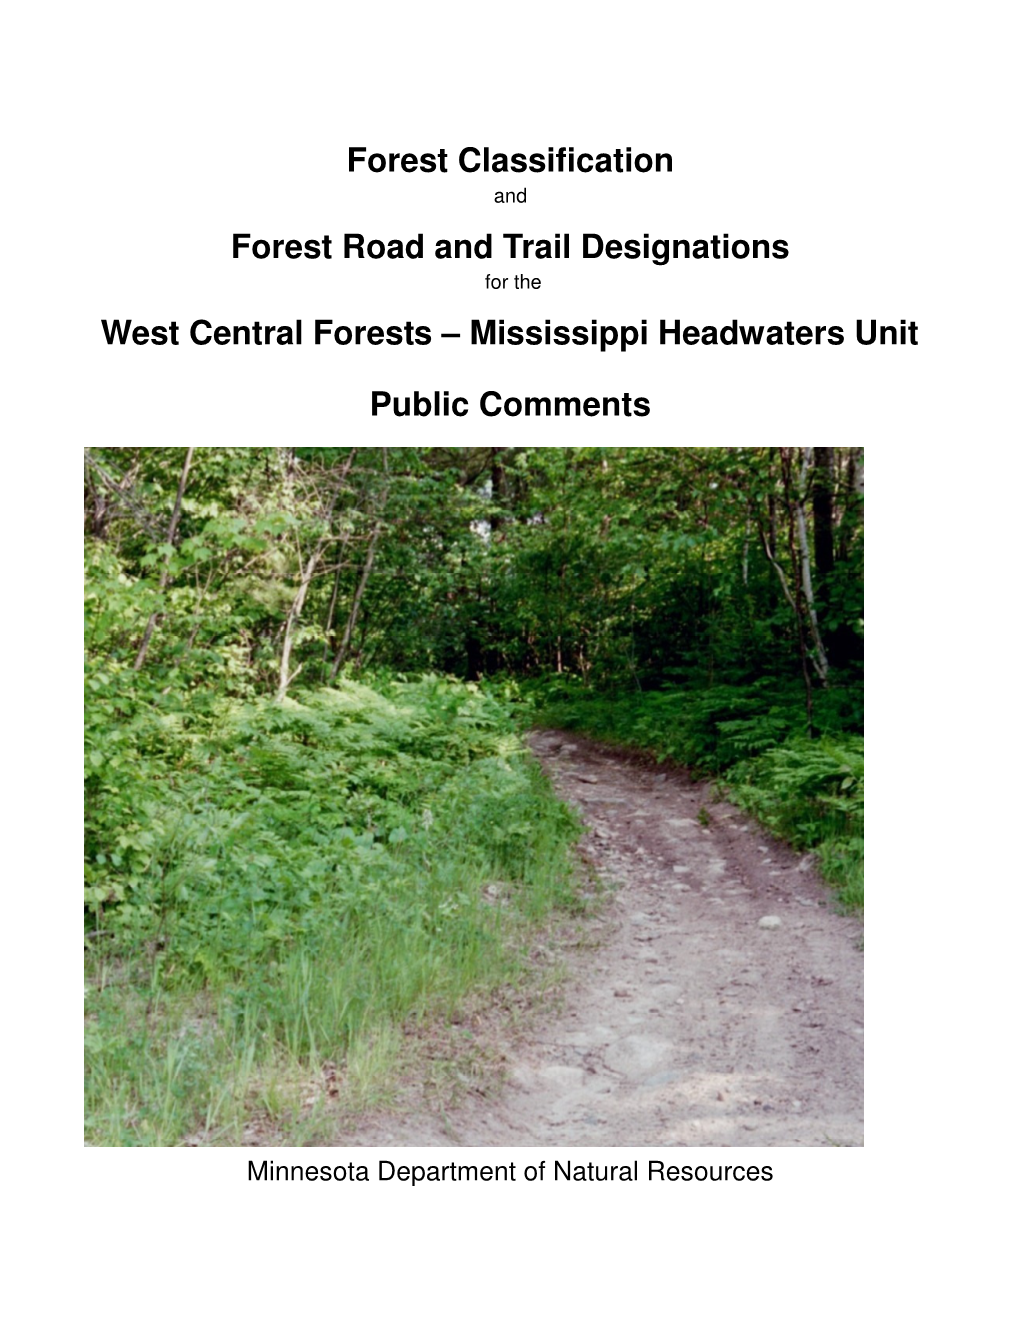 Forest Road and Trail Designations for the West Central Forests – Mississippi Headwaters Unit